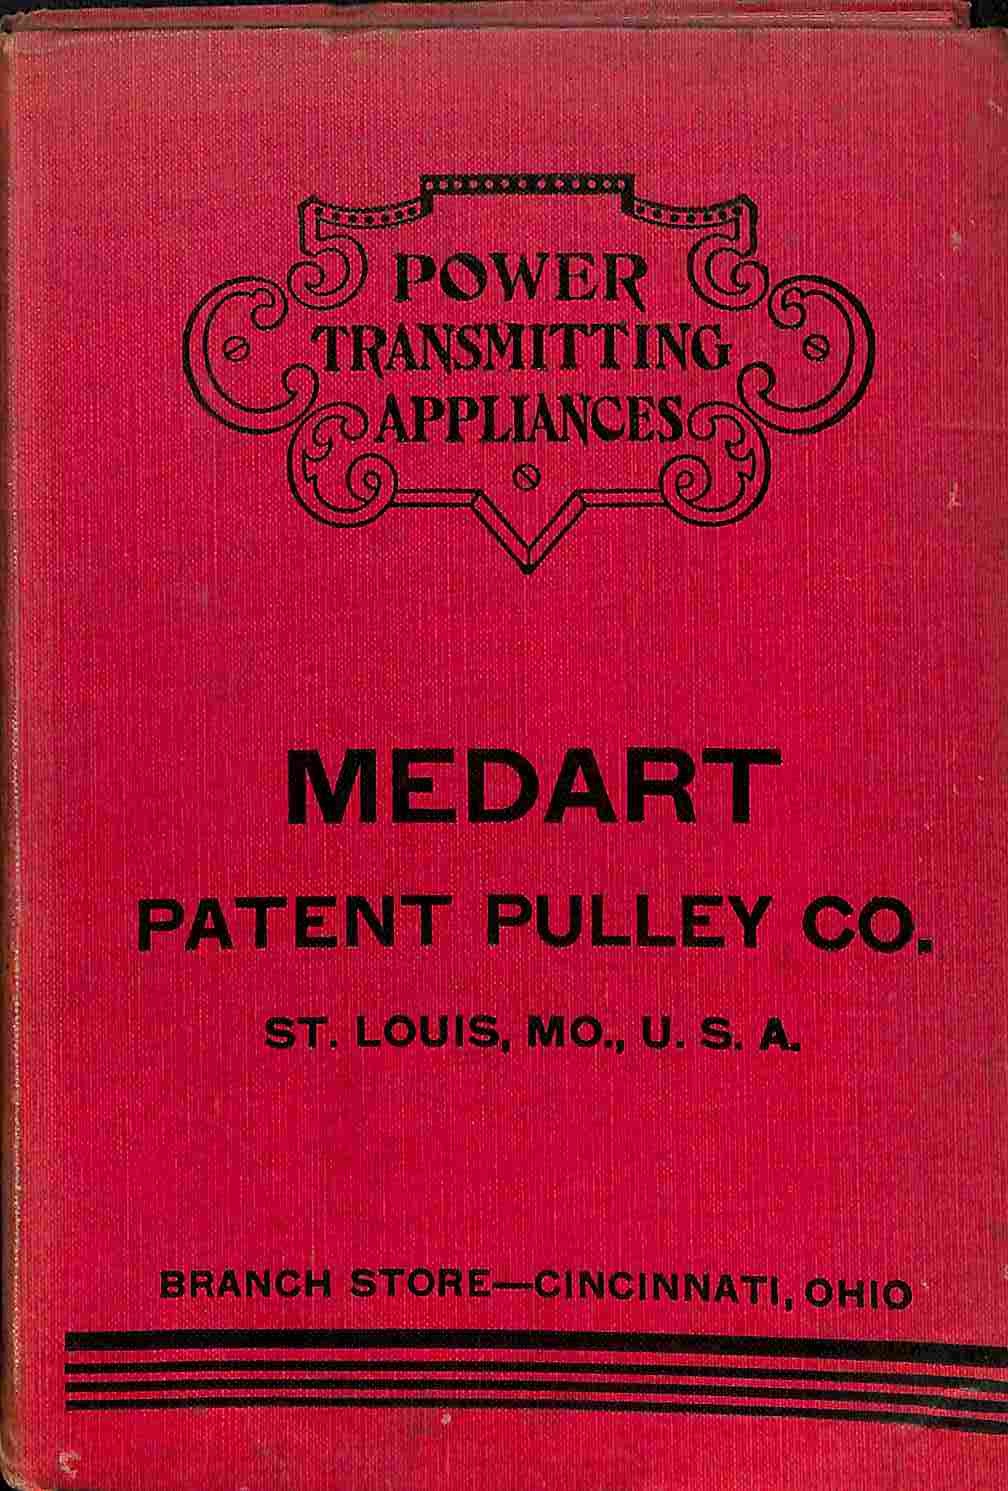 Medard Patent Pulley Co. Manufacturers of steel rim, cast iron and wood split pulleys